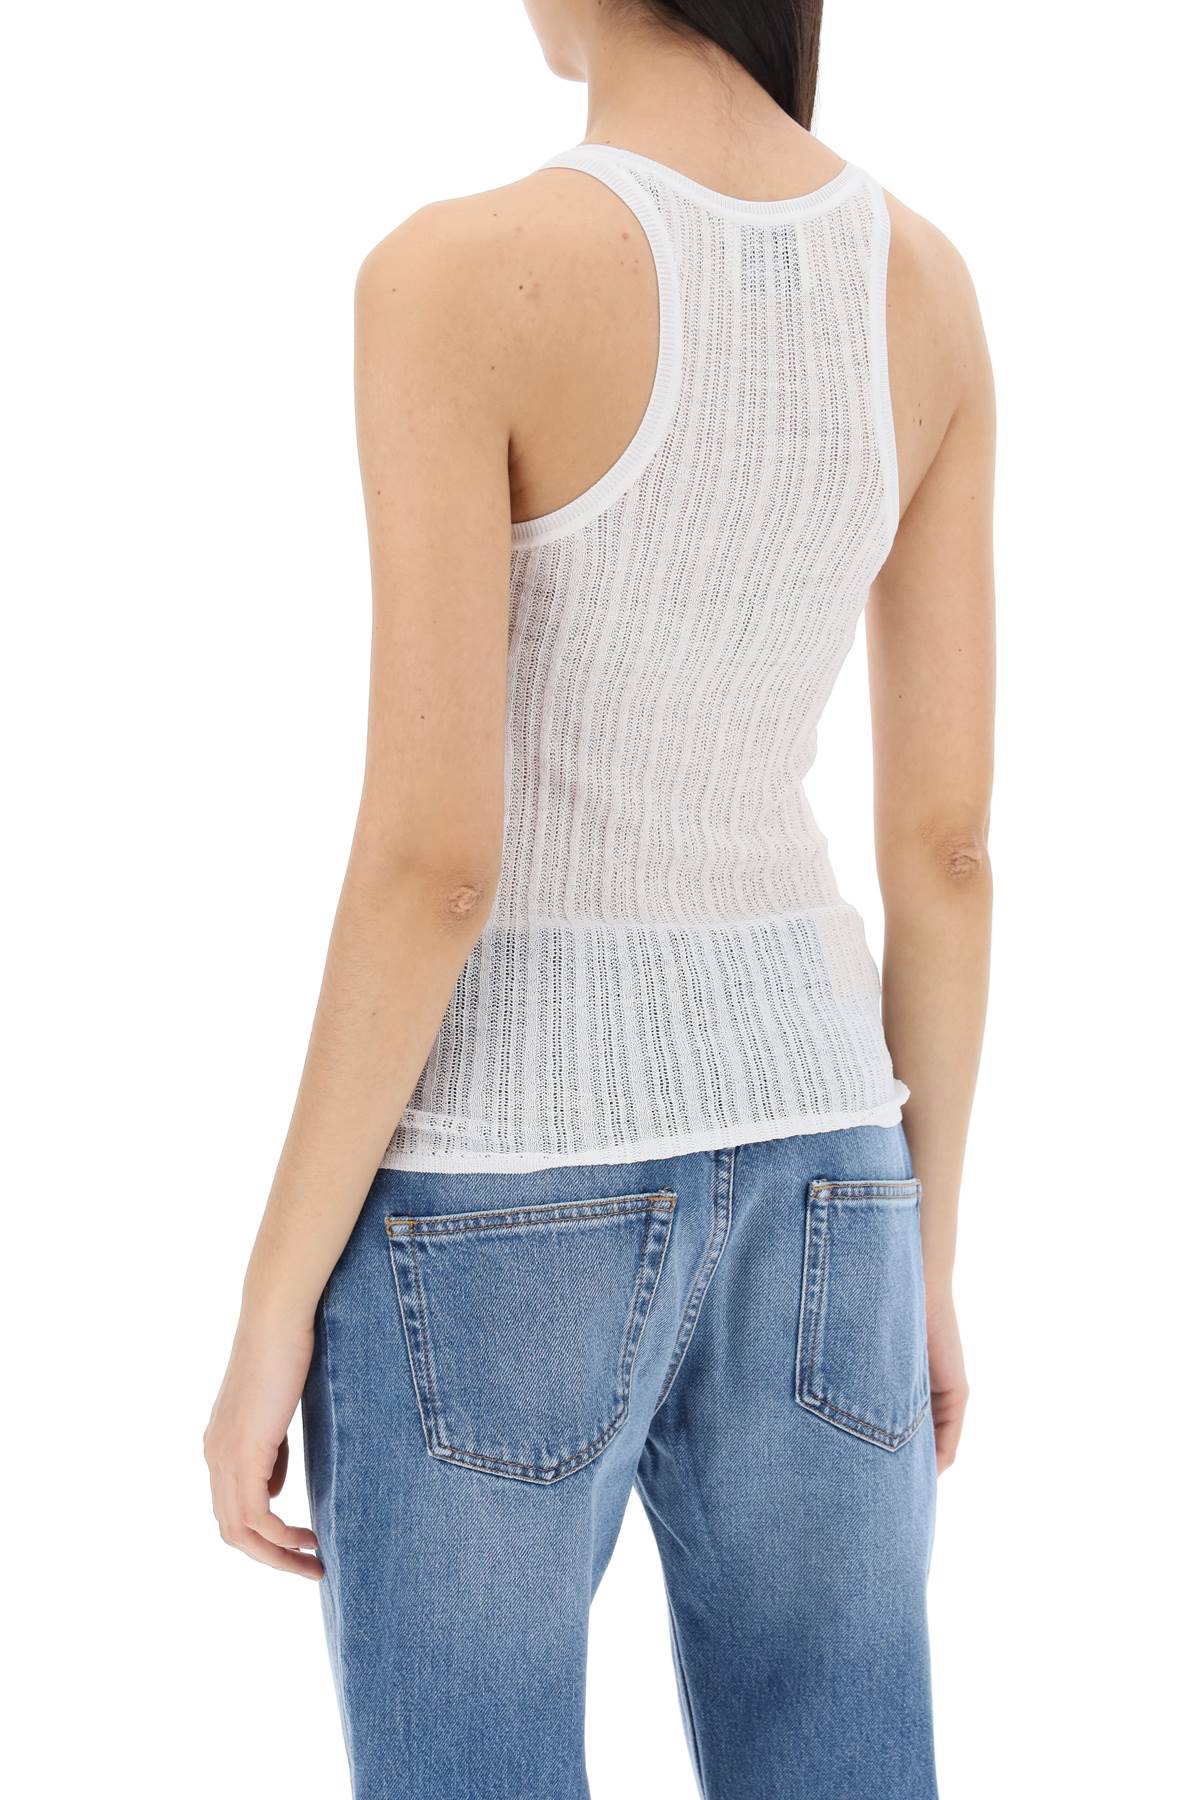 Isabel marant "perforated knit top-2